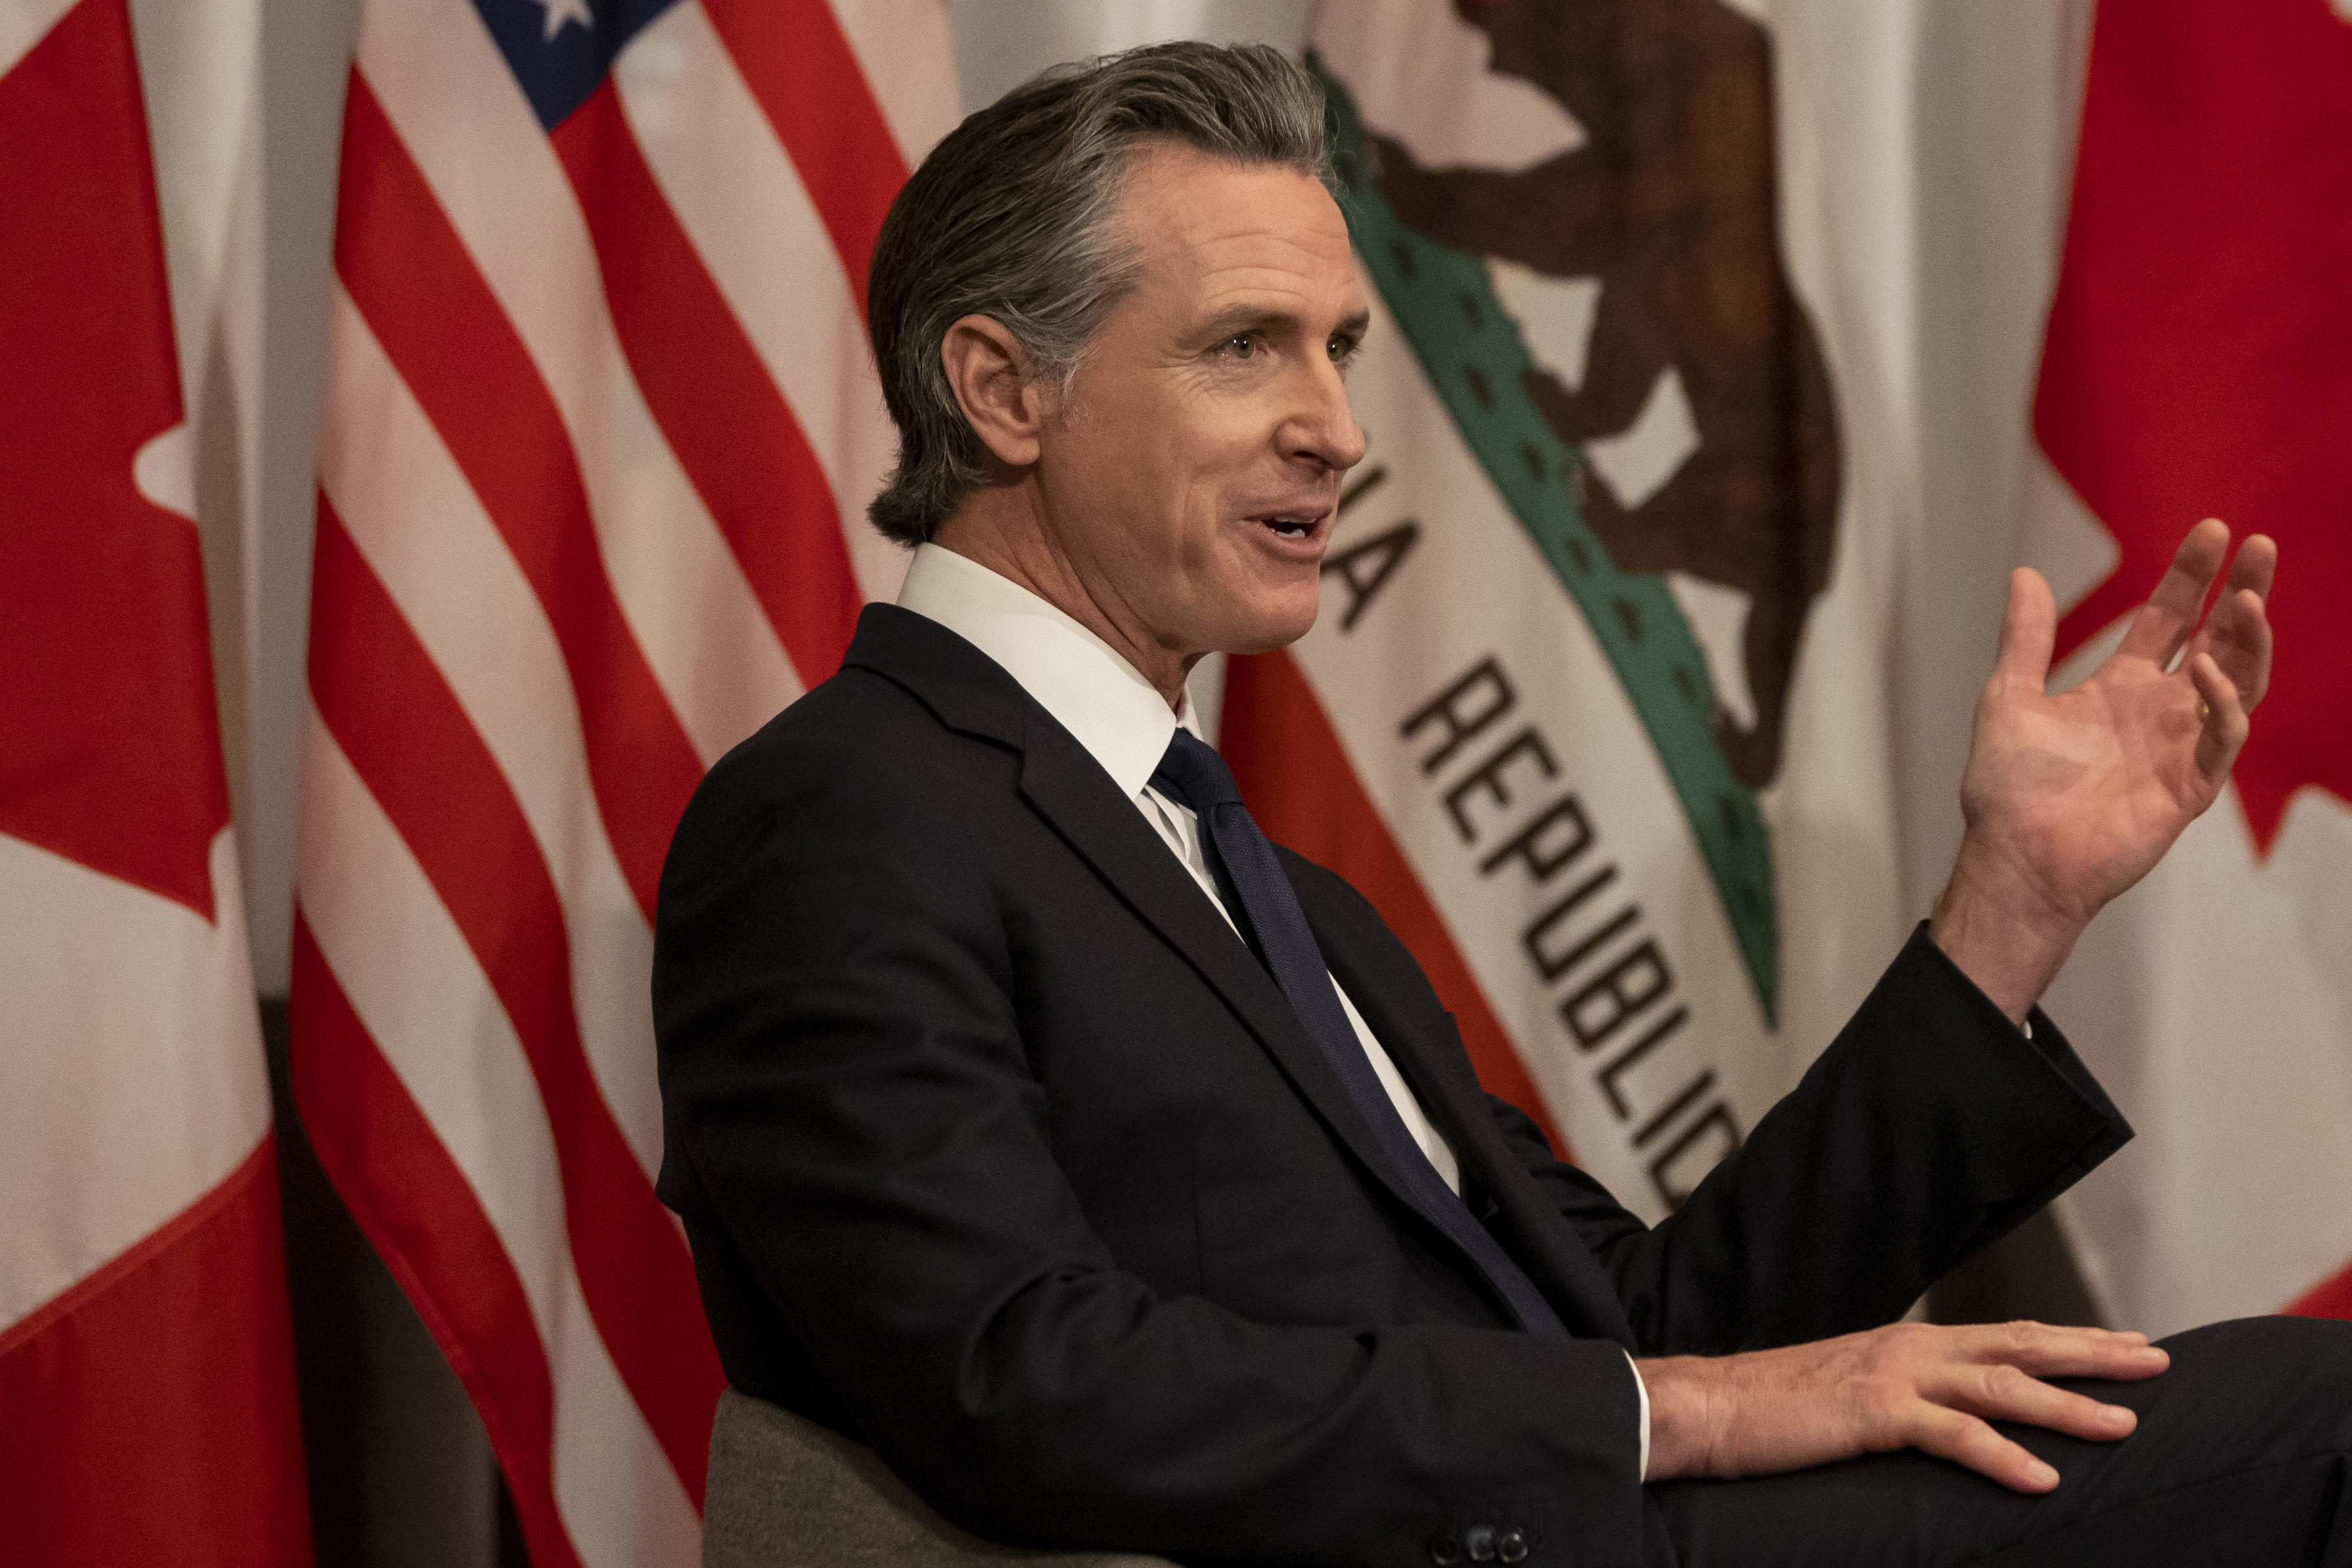 A man in a suit gestures while speaking, flanked by the US and California flags.